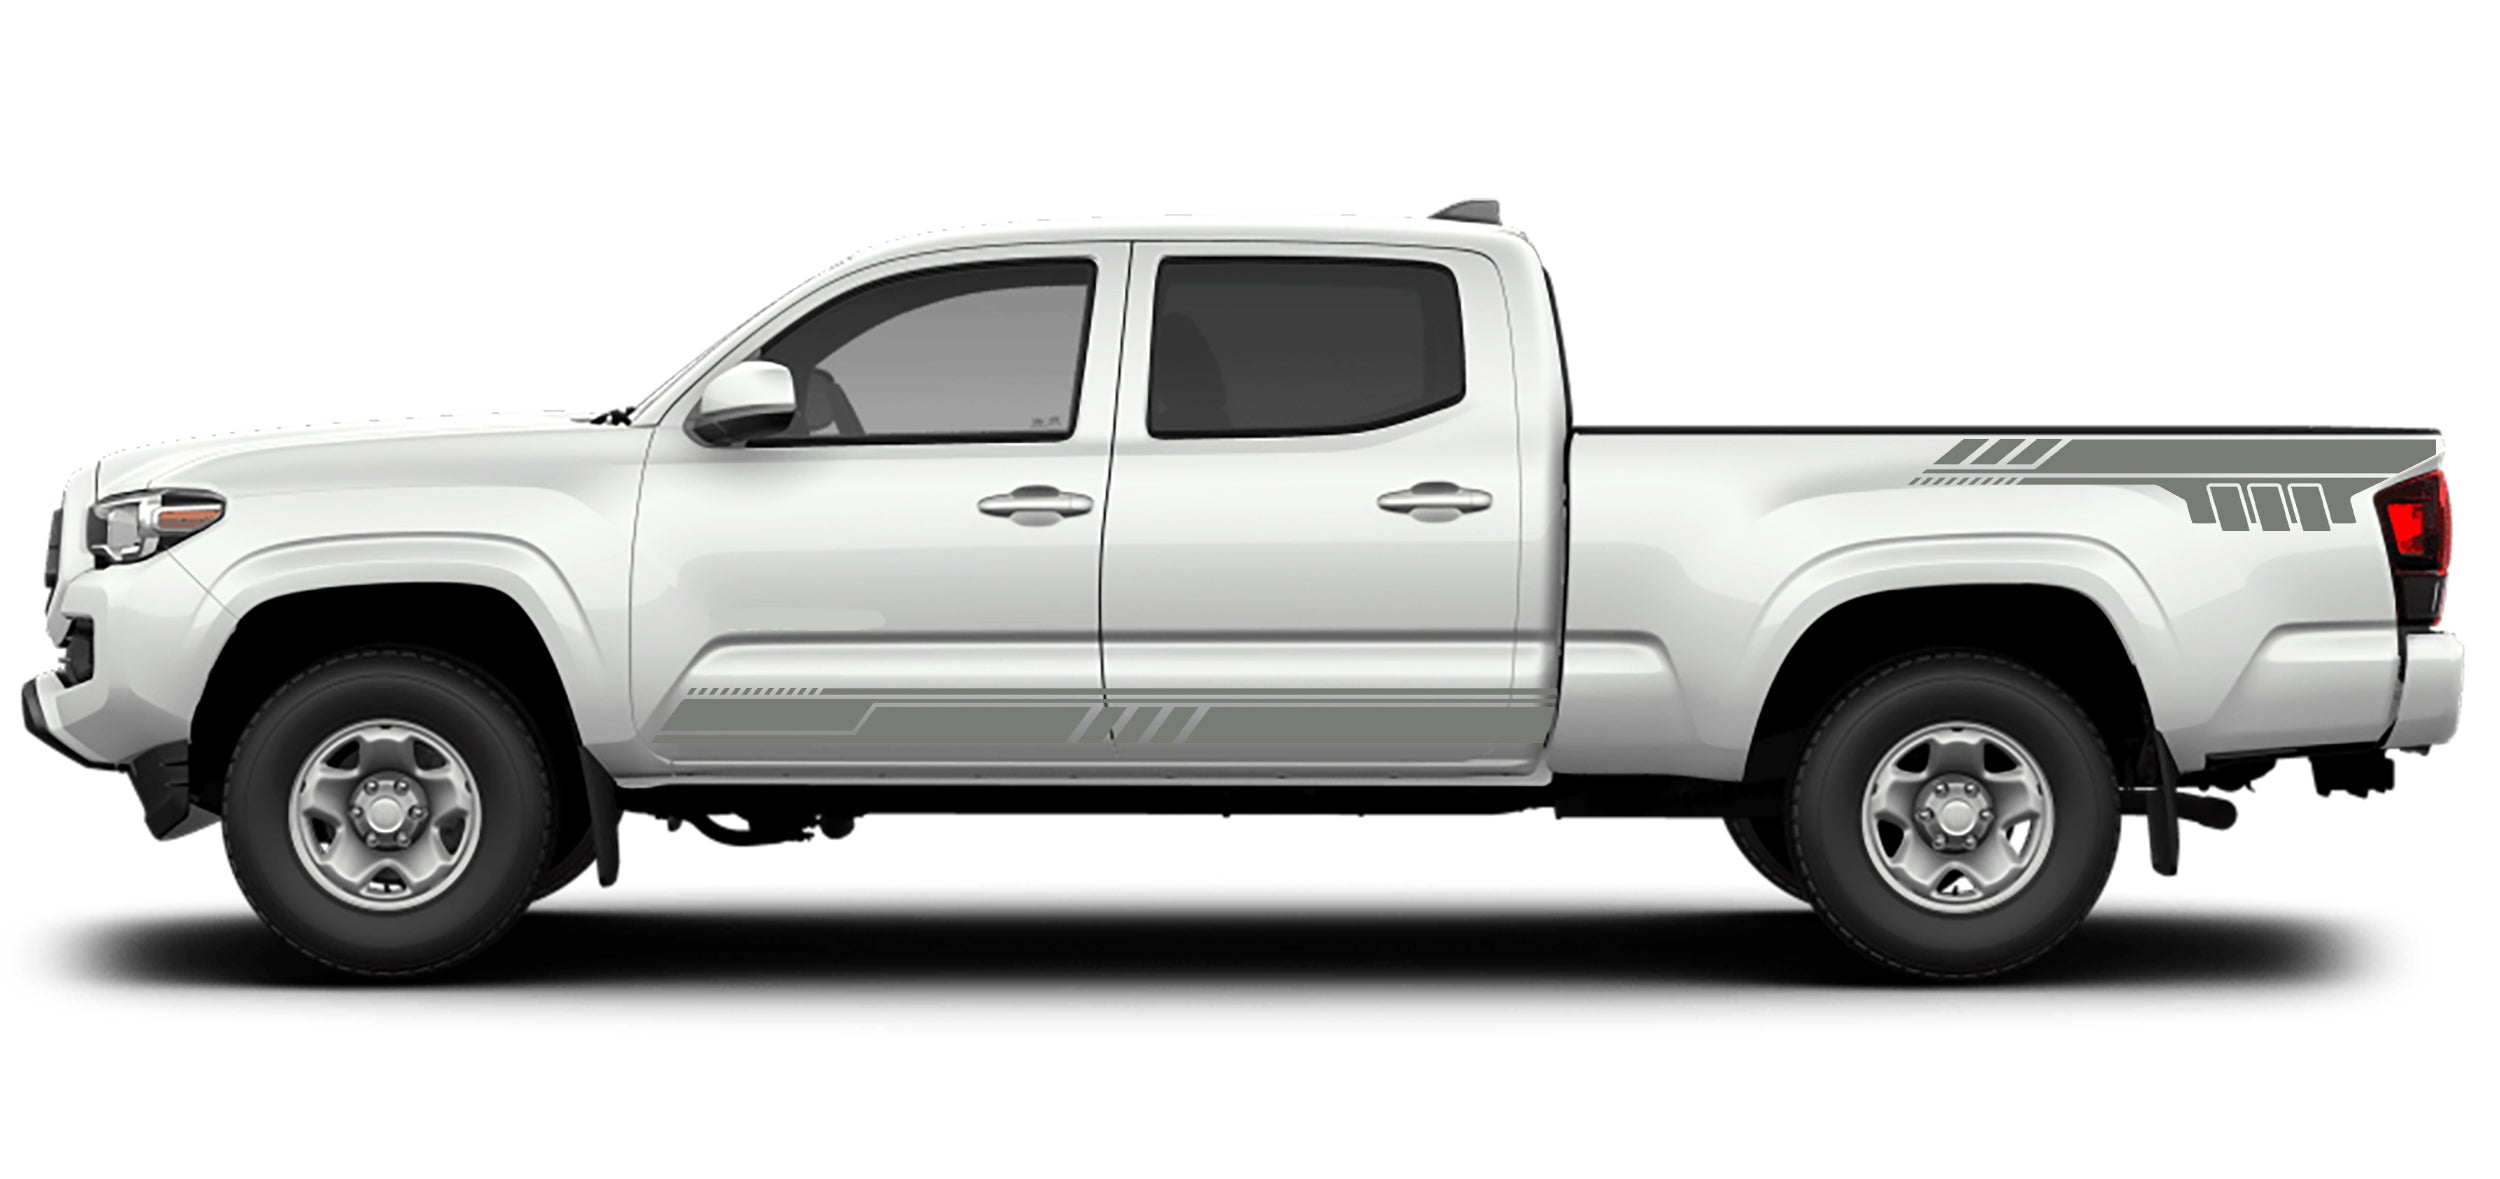 rocker panel and bed decals for toyota tacoma 2016 to 2023 models gray